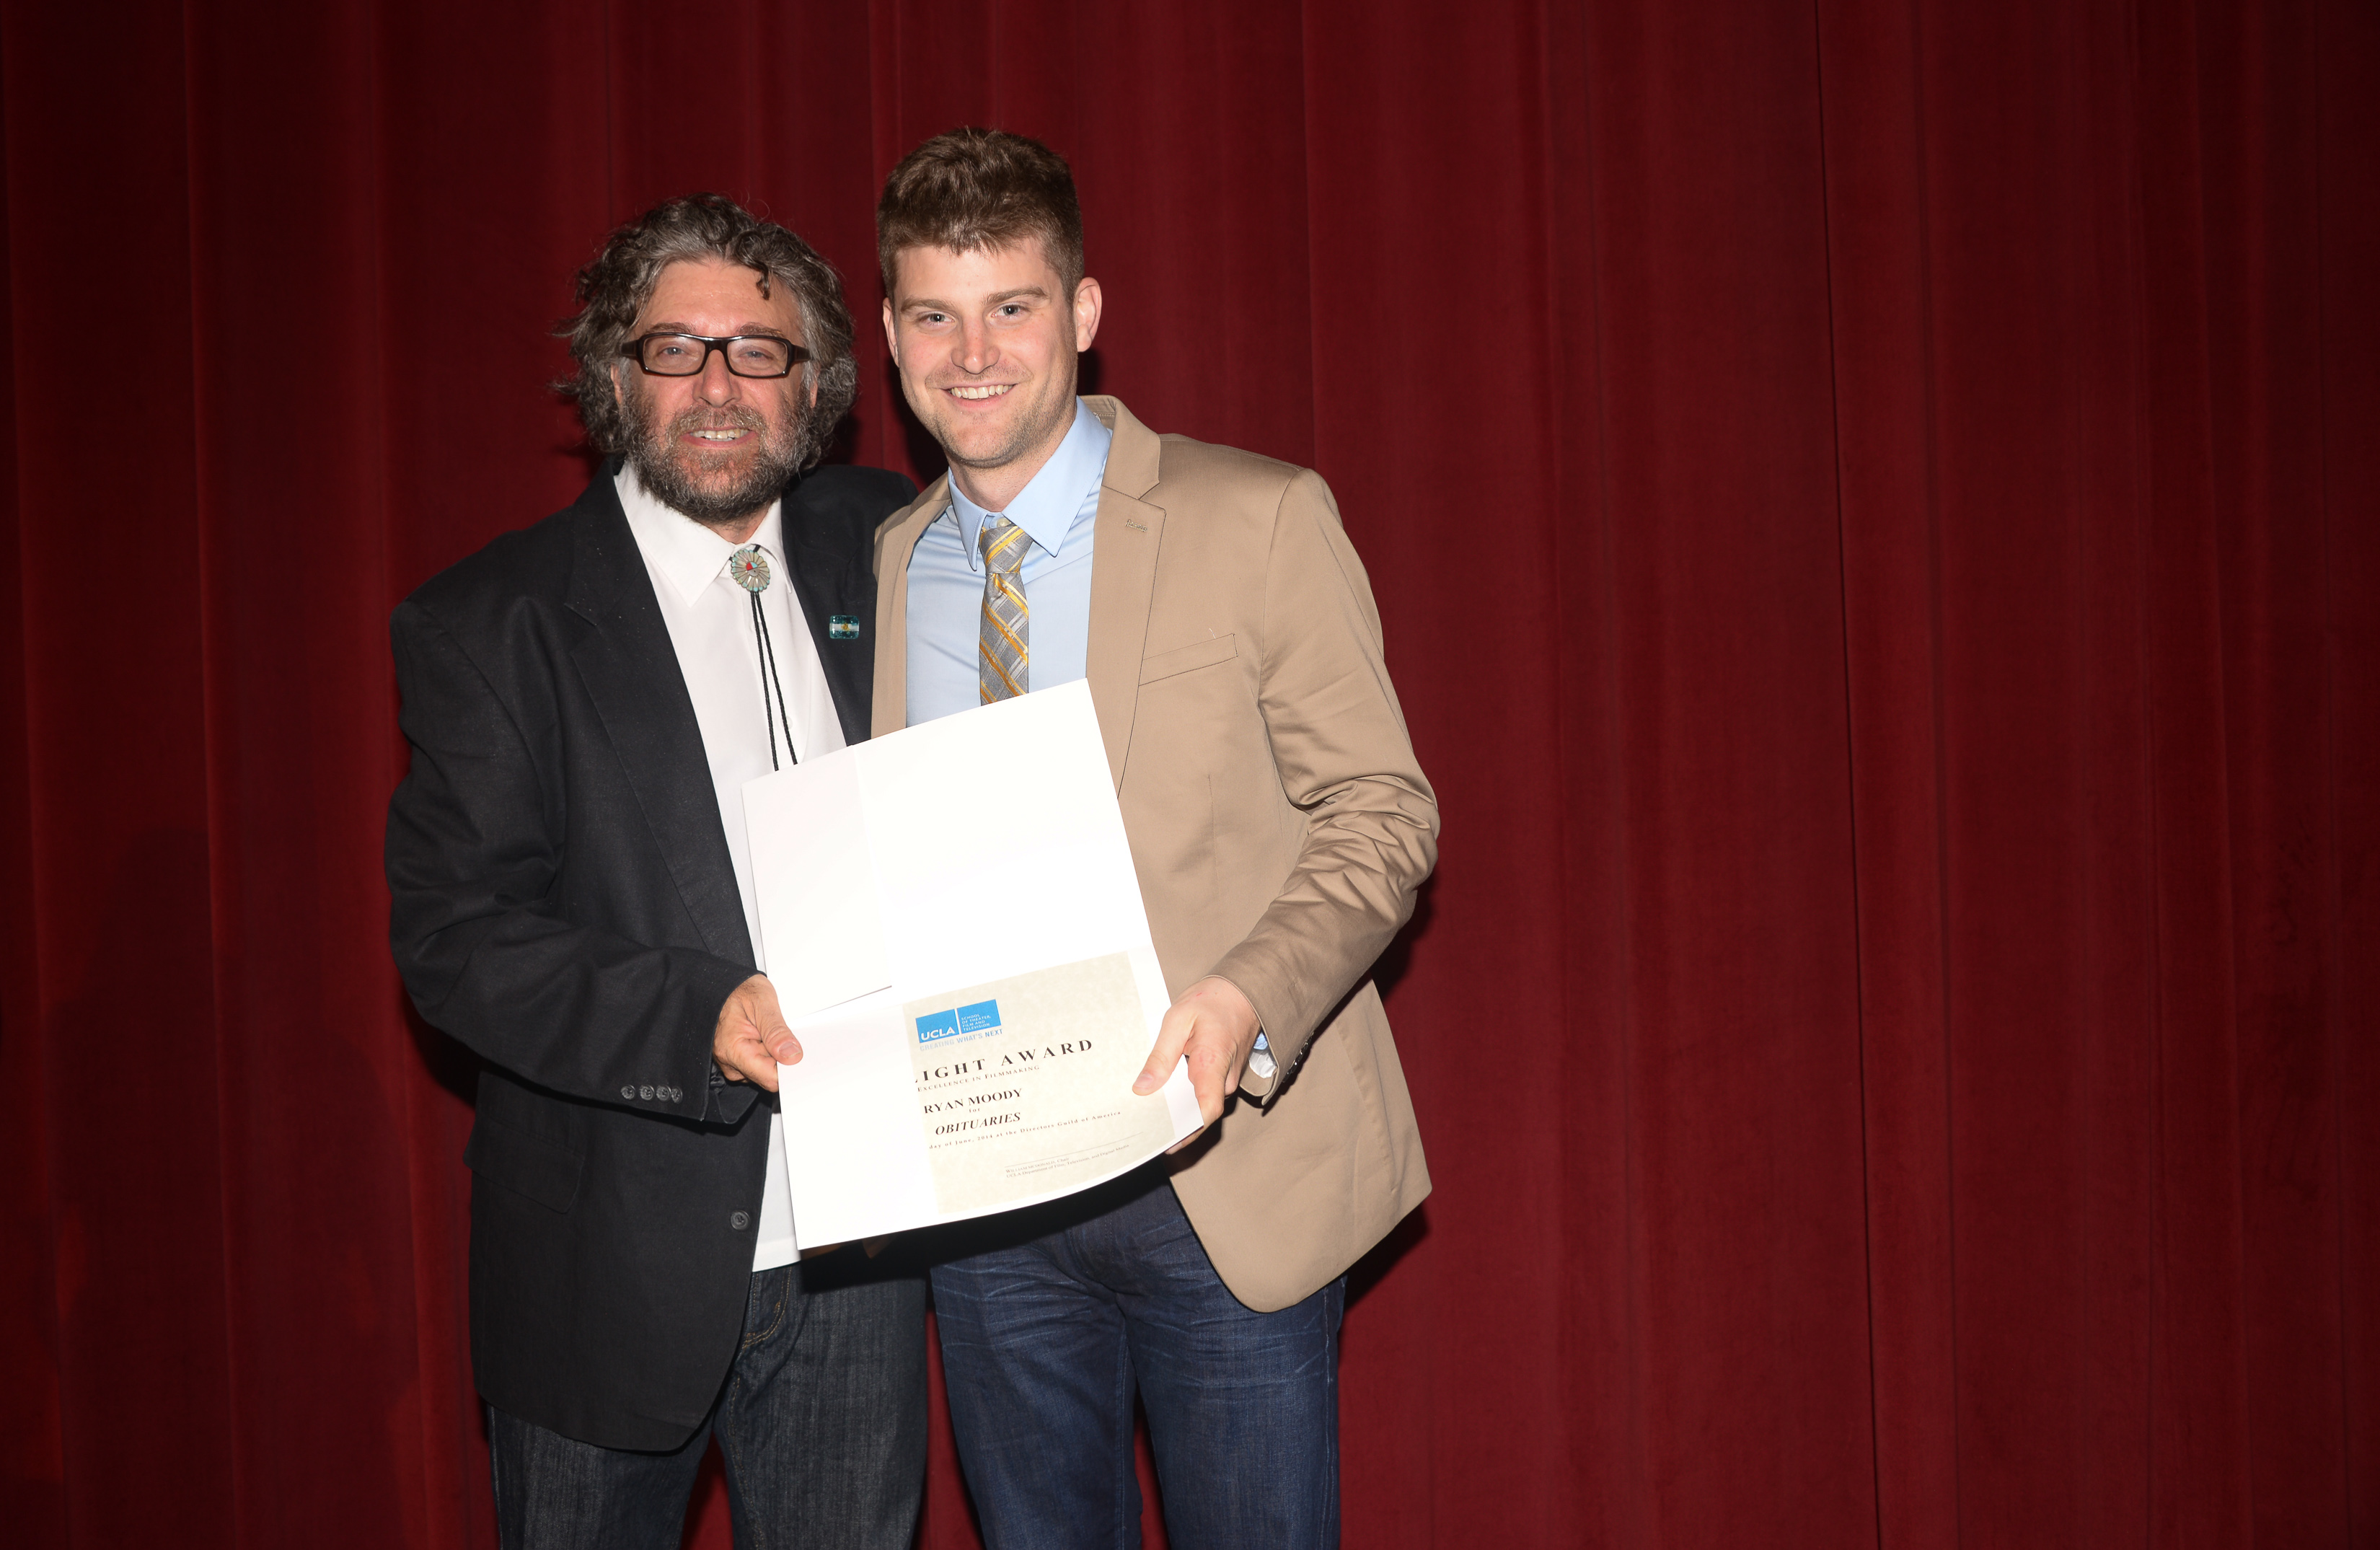 Vice Chair of the UCLA Dept. of Film, Television & Digital Media presenting Ryan Moody with the Spotlight Award for Obituaries.